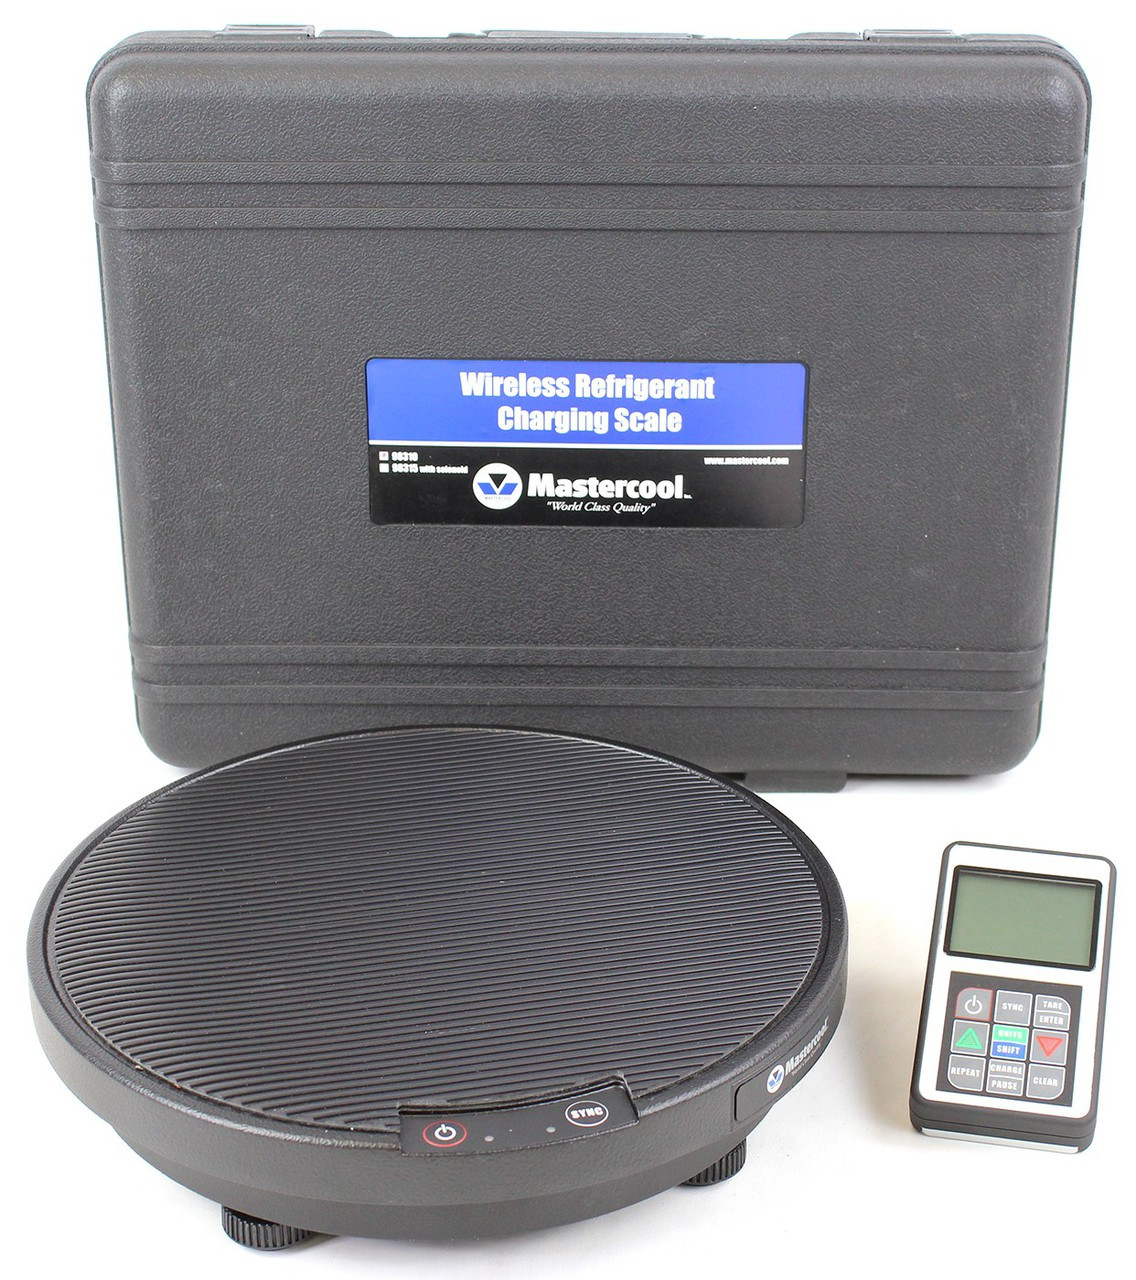 Mastercool 98210-A Accu-Charge II Electronic Refrigerant Scale New Free Shipping 